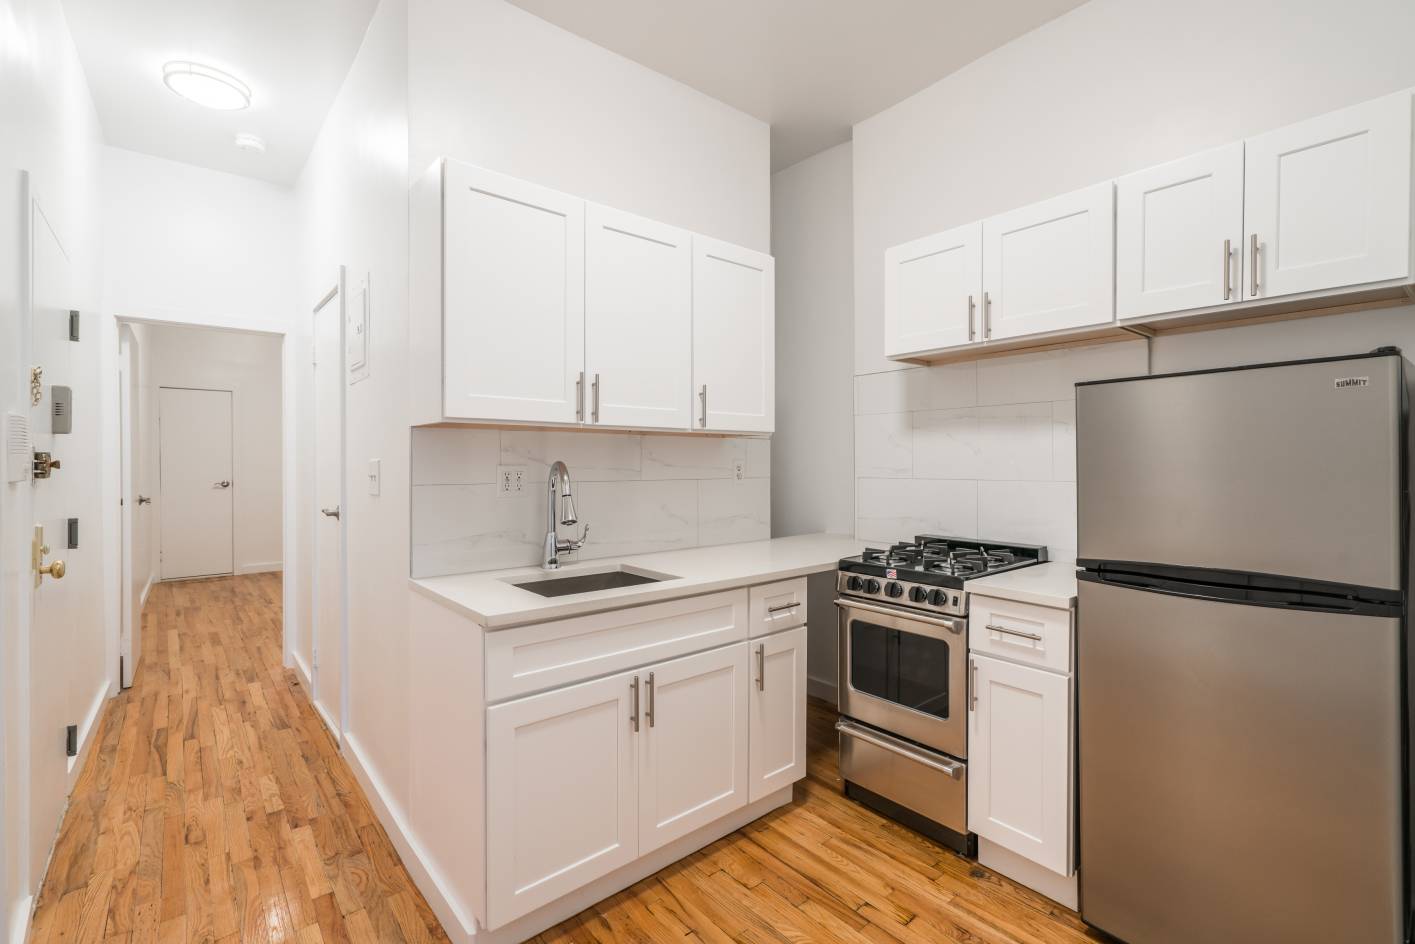 Prime Nolita ! A true 2 bedroom with tons of sunlight, high ceilings, renovated kitchen and bath, living room, new hardwood floors, 2 full size bedrooms, wing configuration, steps from ...